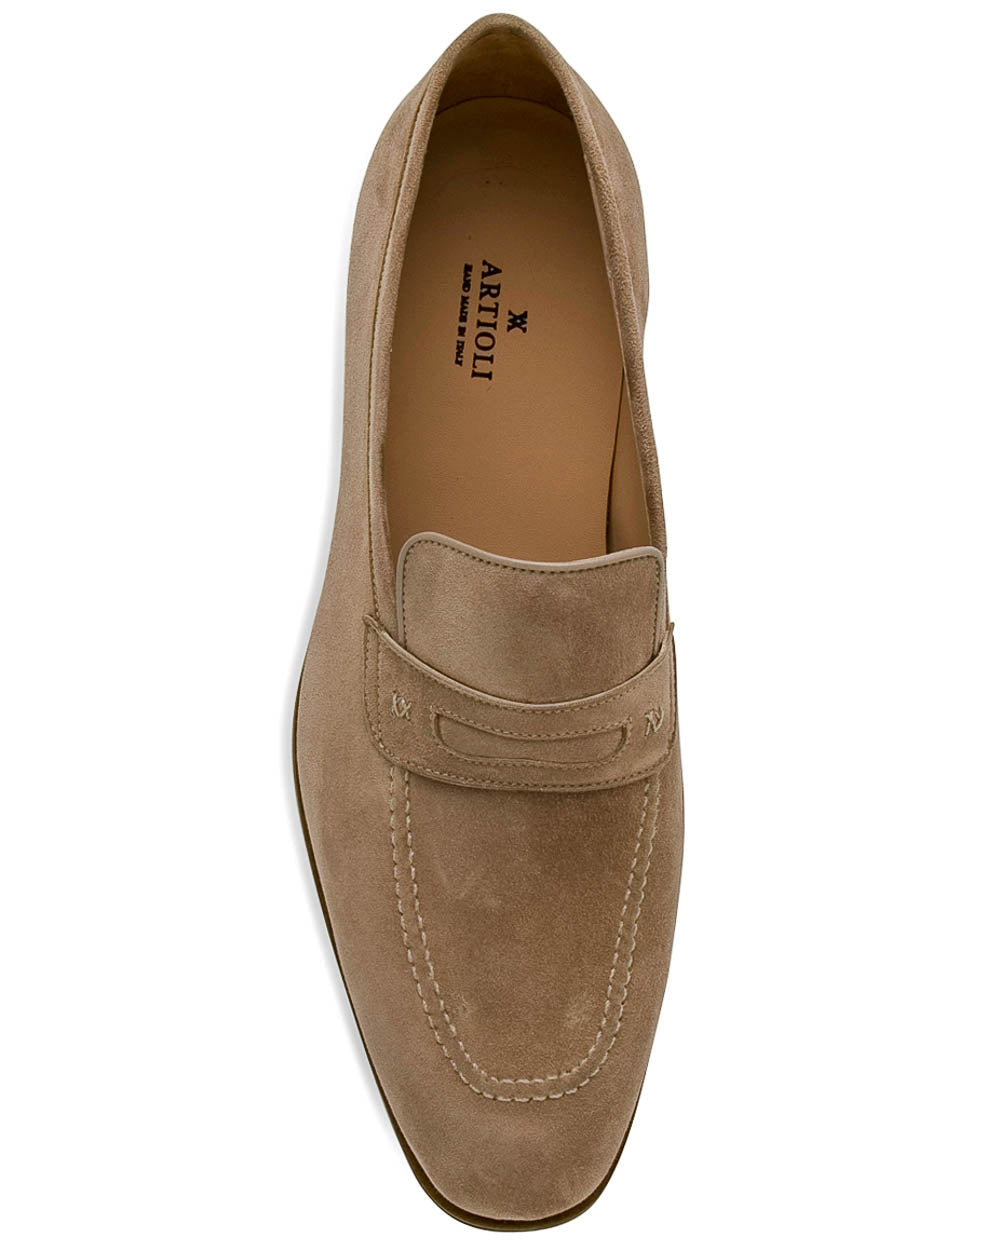 Palissandro Monaco Suede Penny Loafer